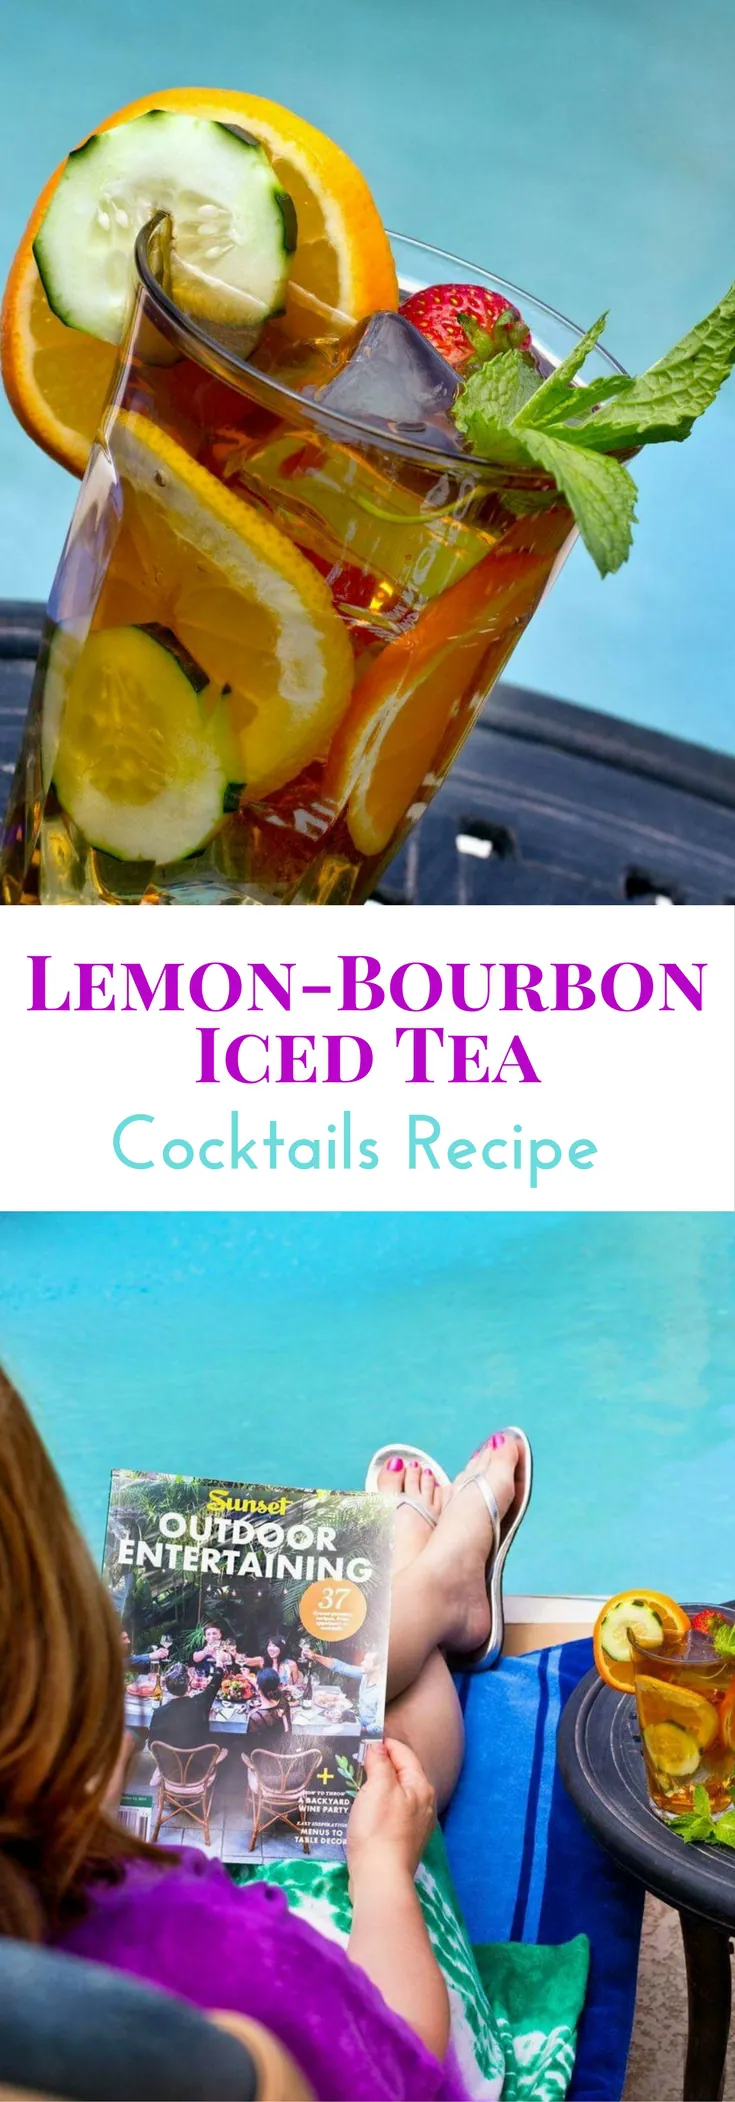 Lemon-Bourbon Iced Tea Cocktails are a favorite summer drink. You'll love the combo of classic flavors!